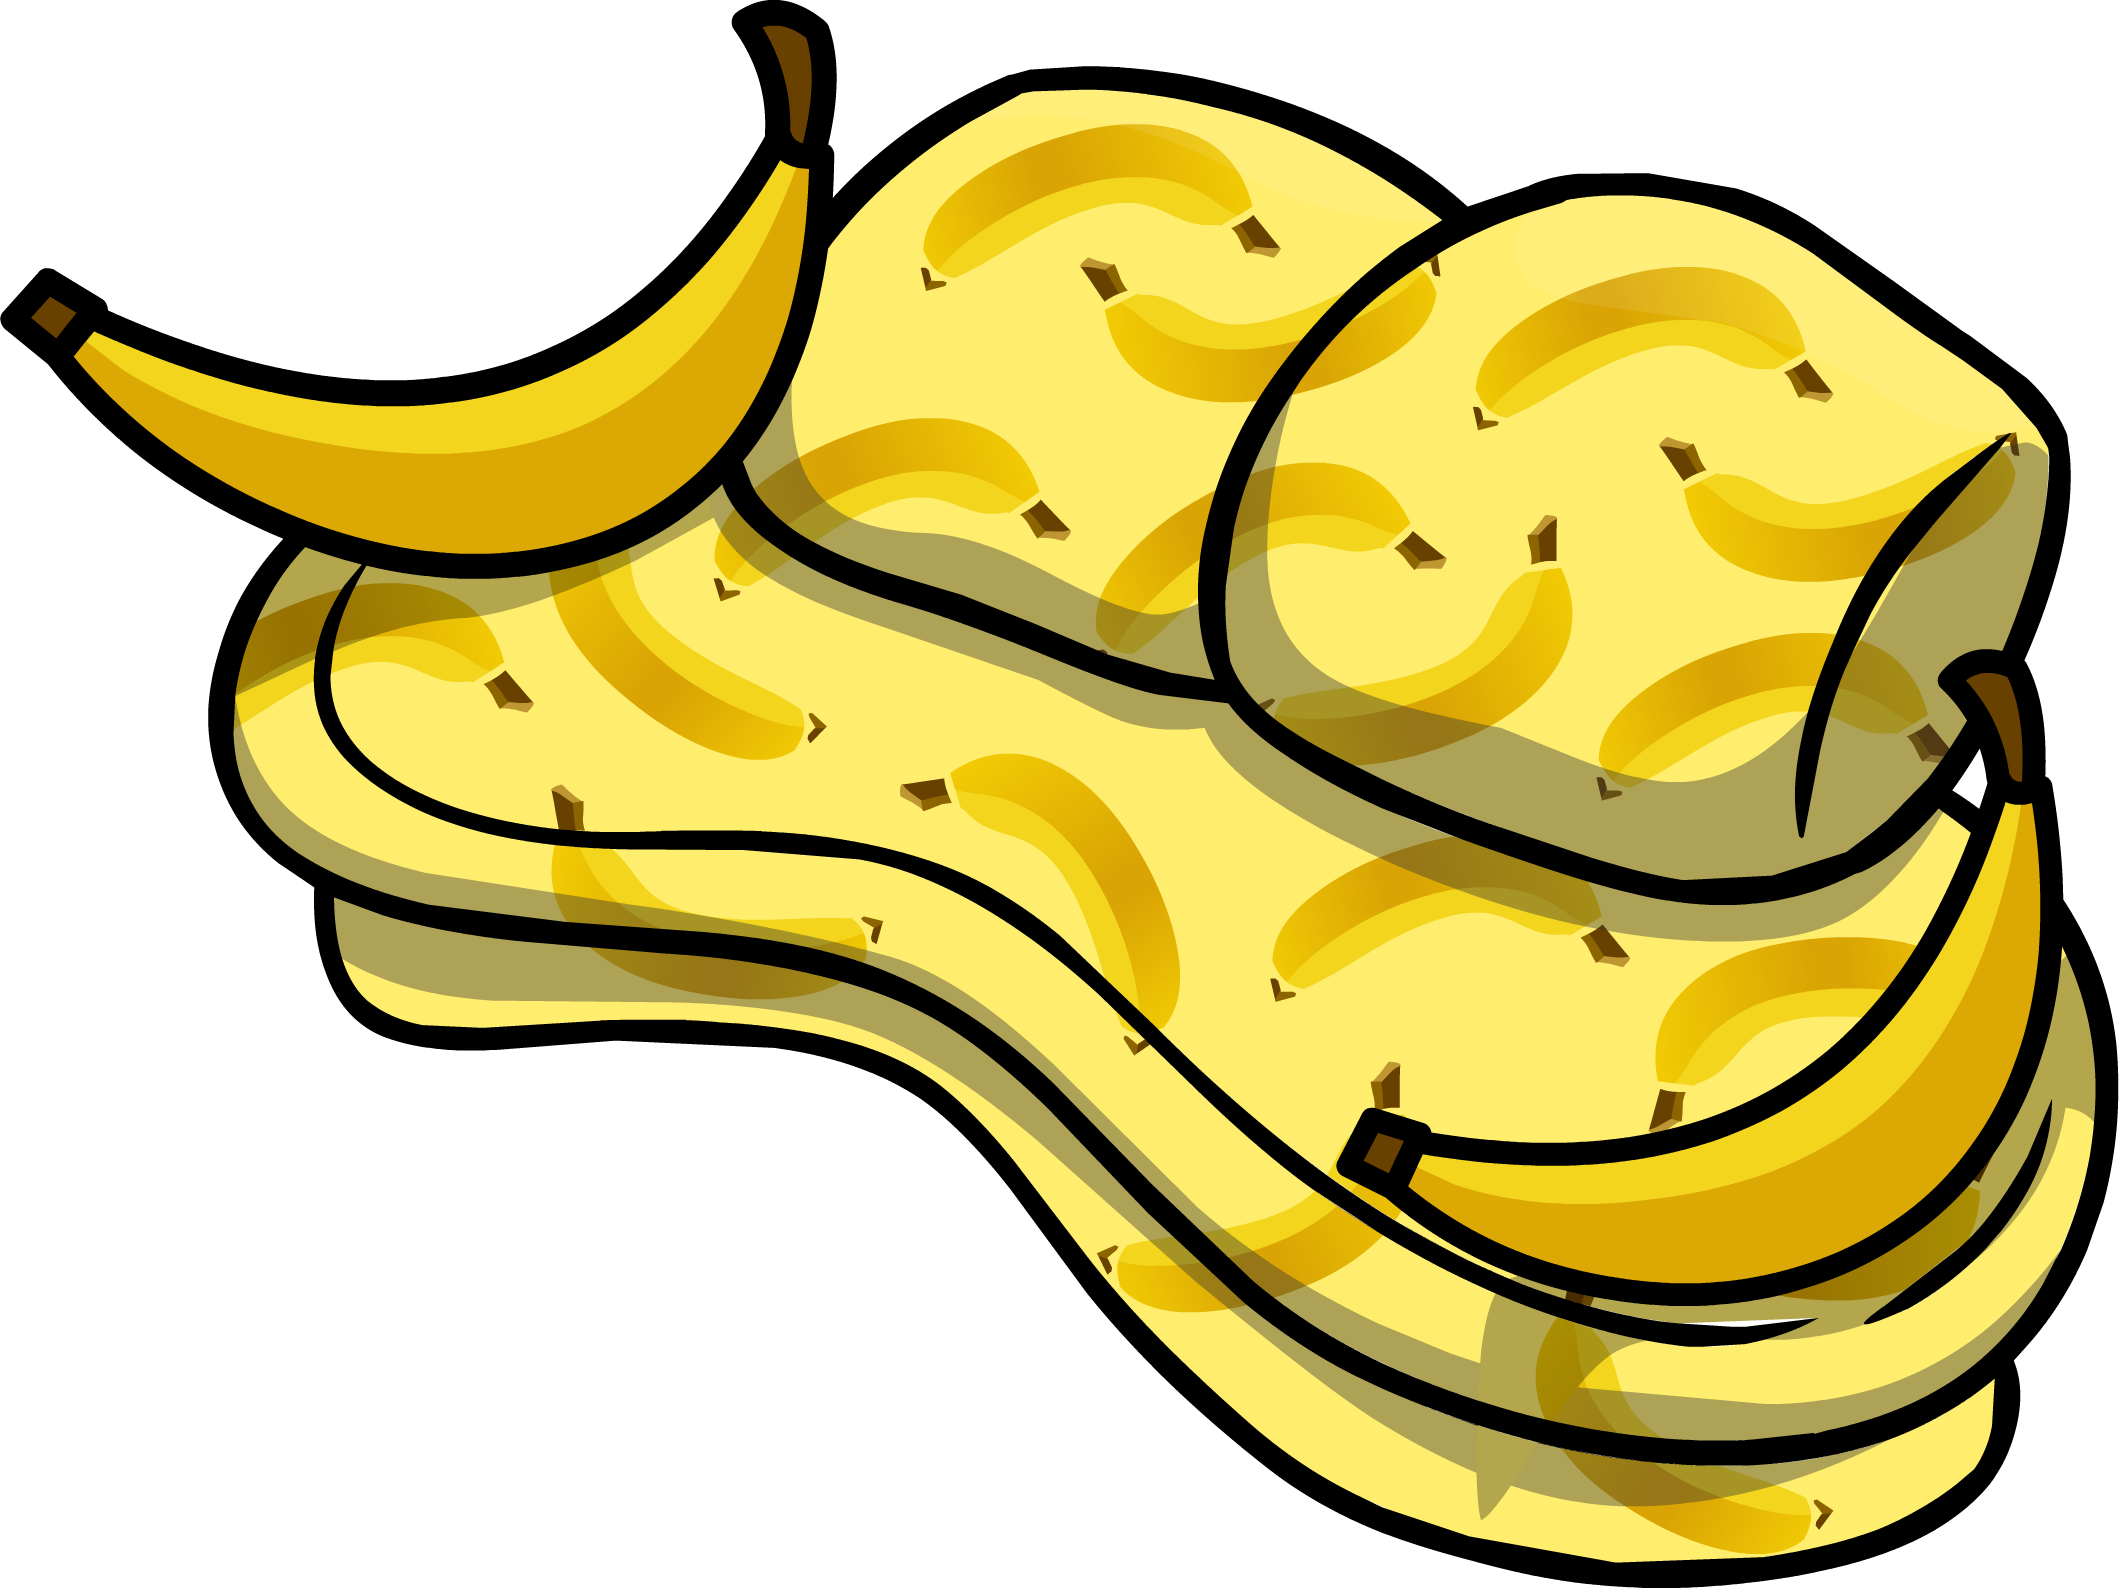 Banana Couch Furniture Icon Id 893 - Club Penguin Furniture Couch (2119x1588)